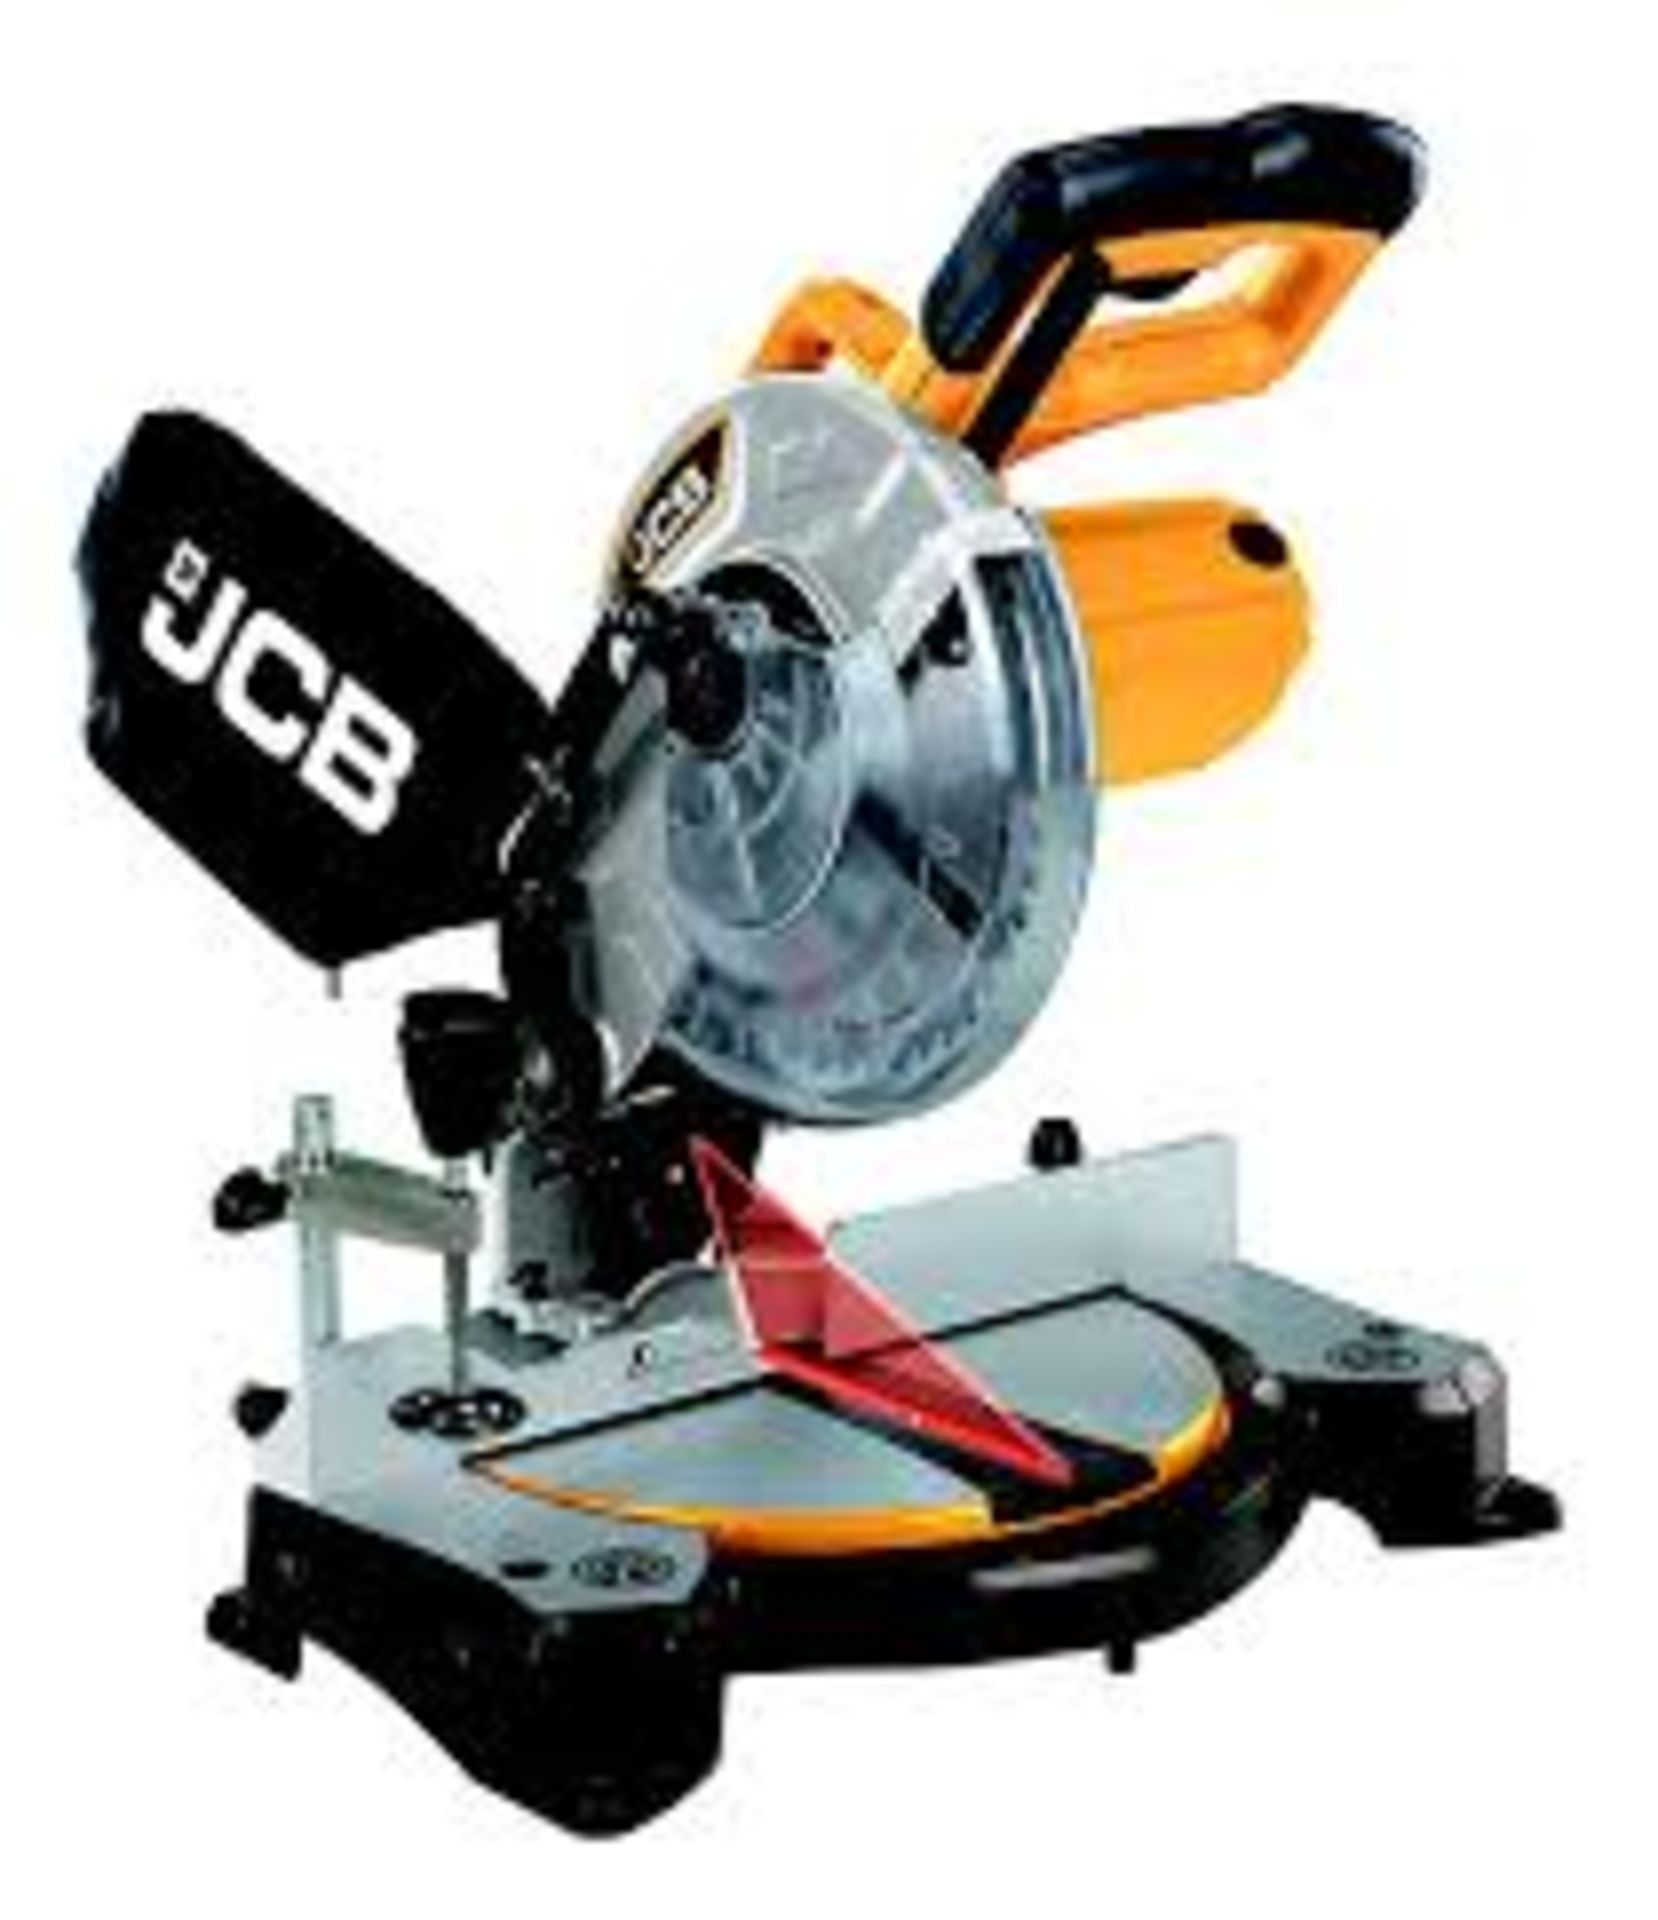 JCB 240V 210mm Corded Compound mitre saw JCB-MS210. - PW. Precision cutting with the JCB 210mm